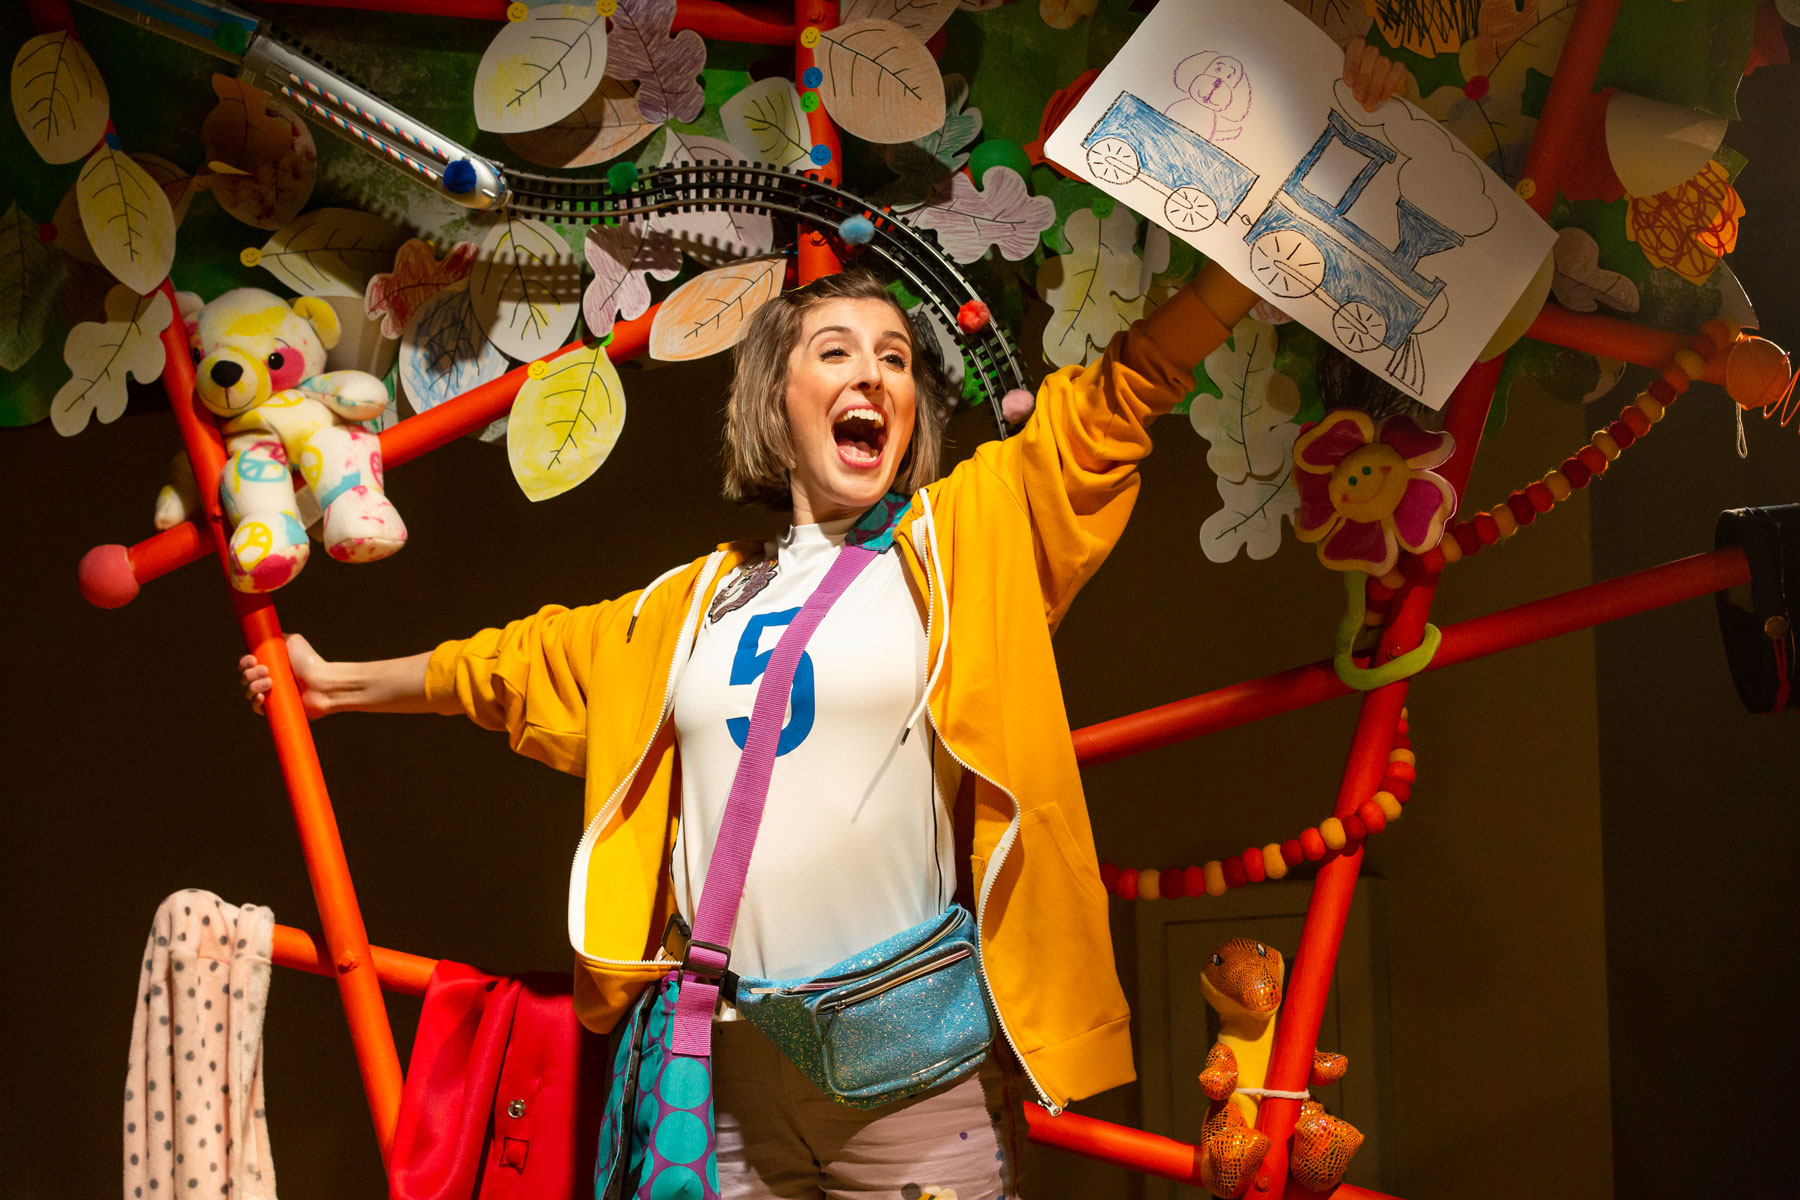 Actor in vibrant clothing standing on a platform and holding up a sign to the audience